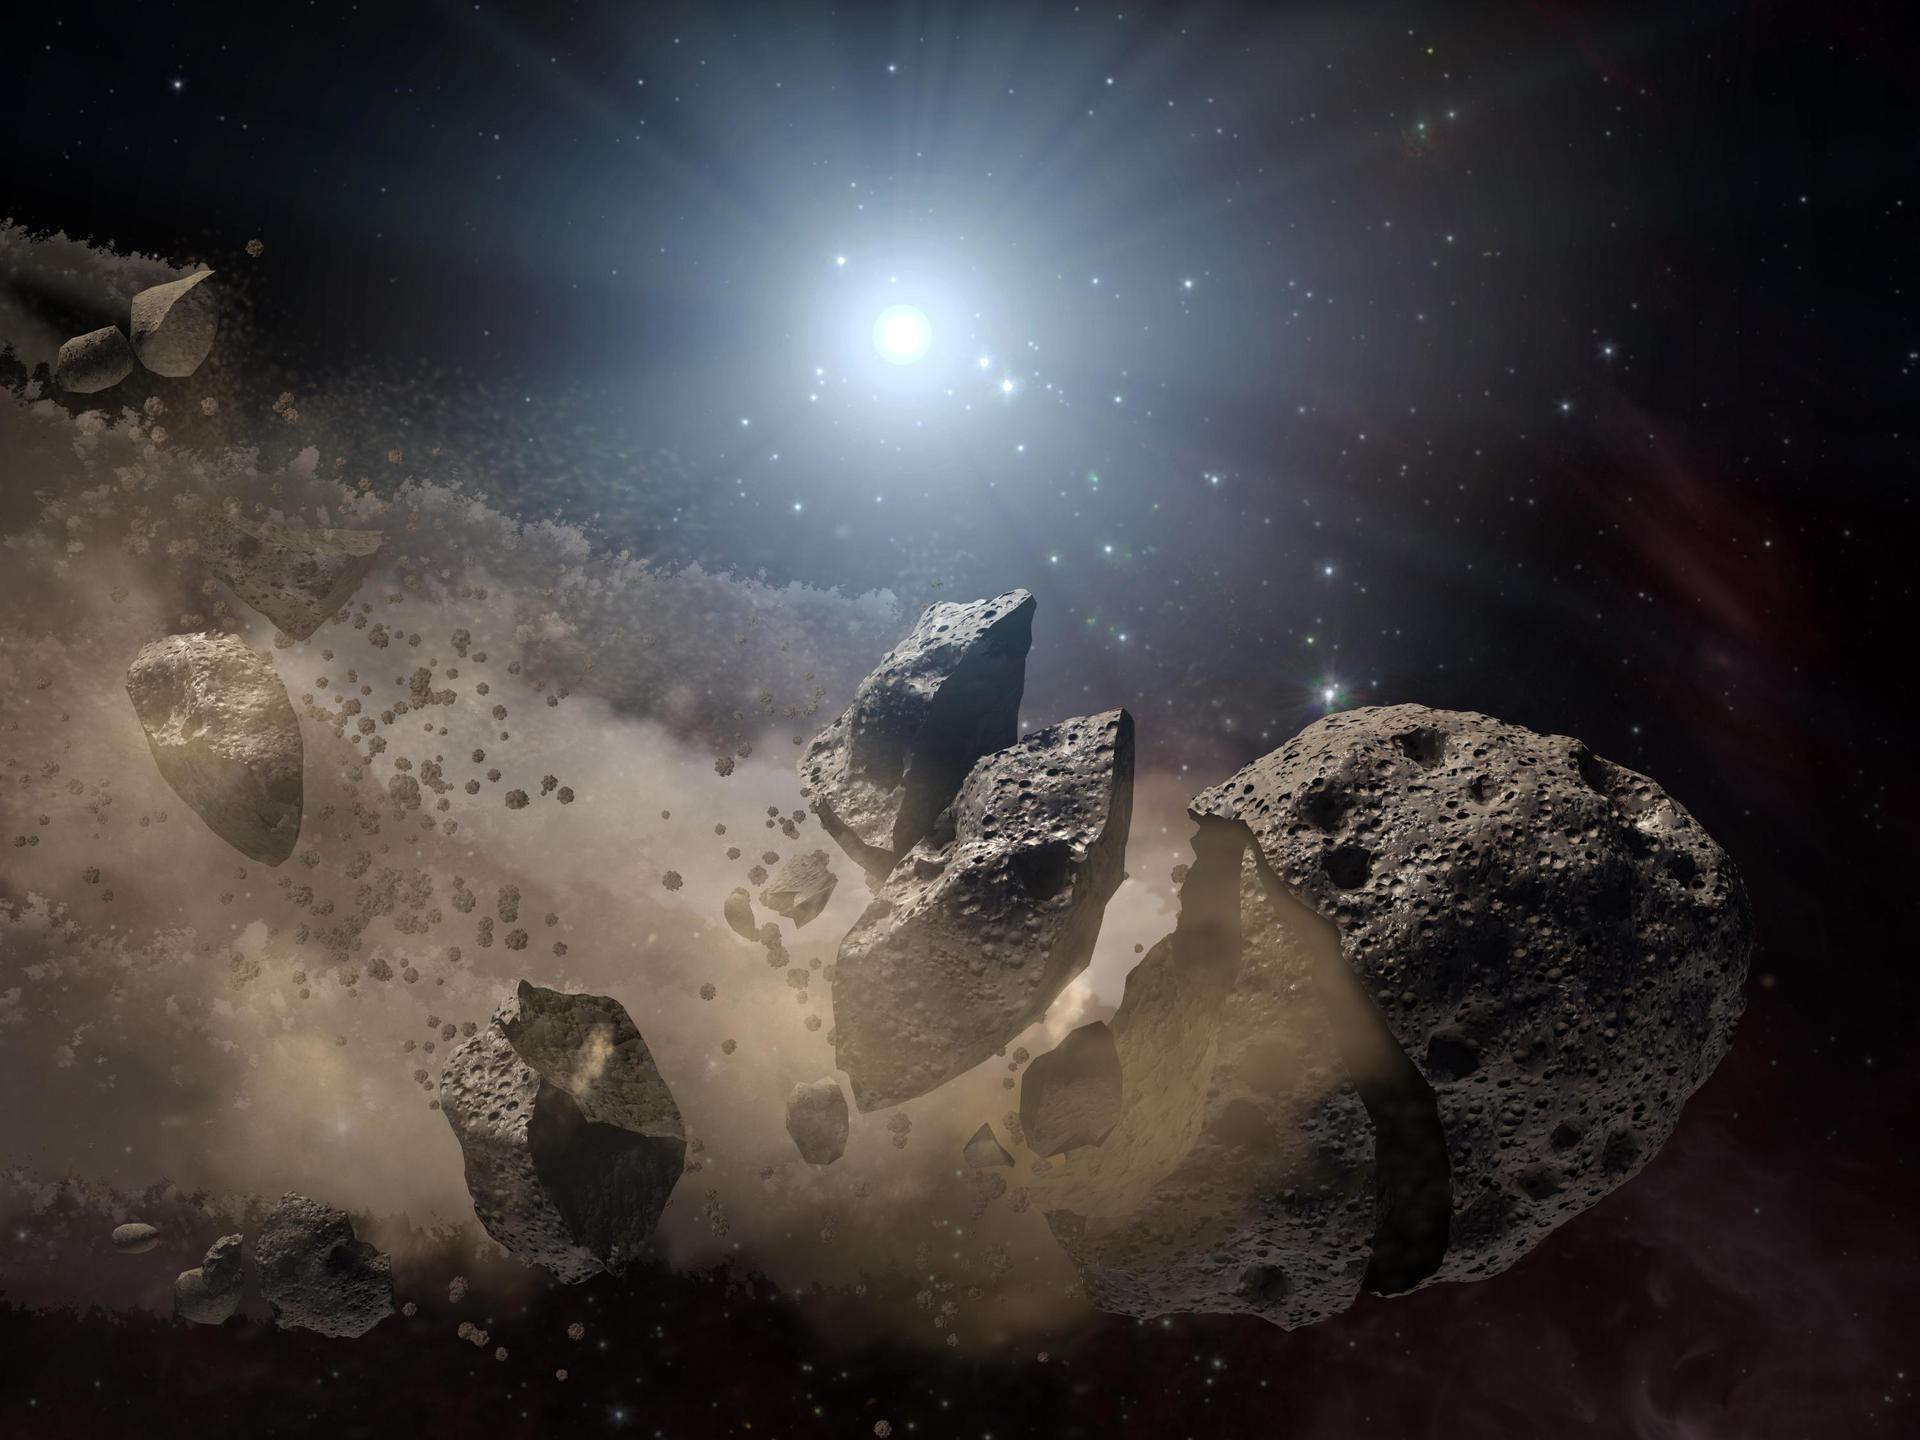 An asteroid breaking into little pieces in space.